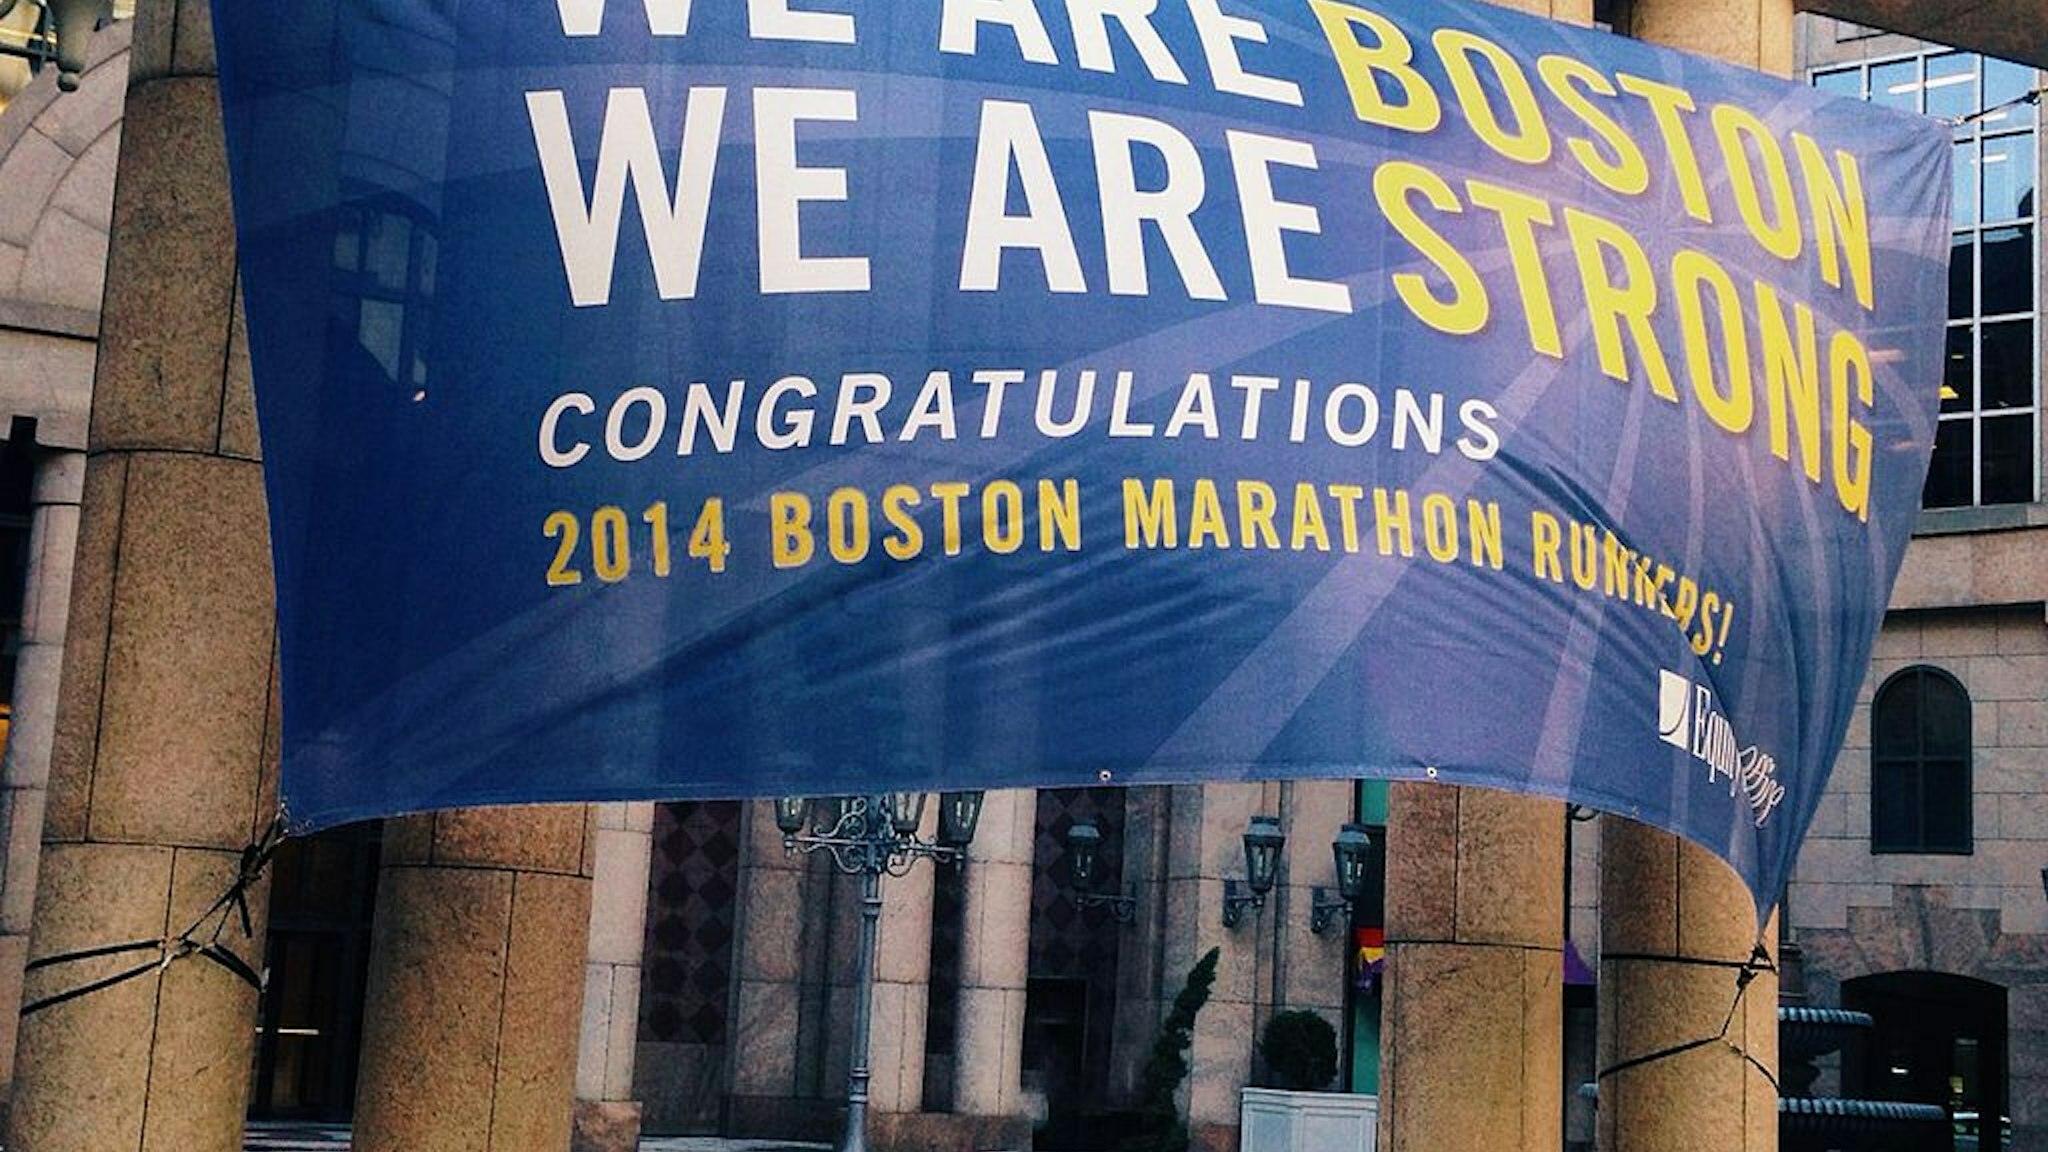 A banner honoring the 2014 Boston Marathon is strung from pillars on Boylston Street and strains in a strong wind.